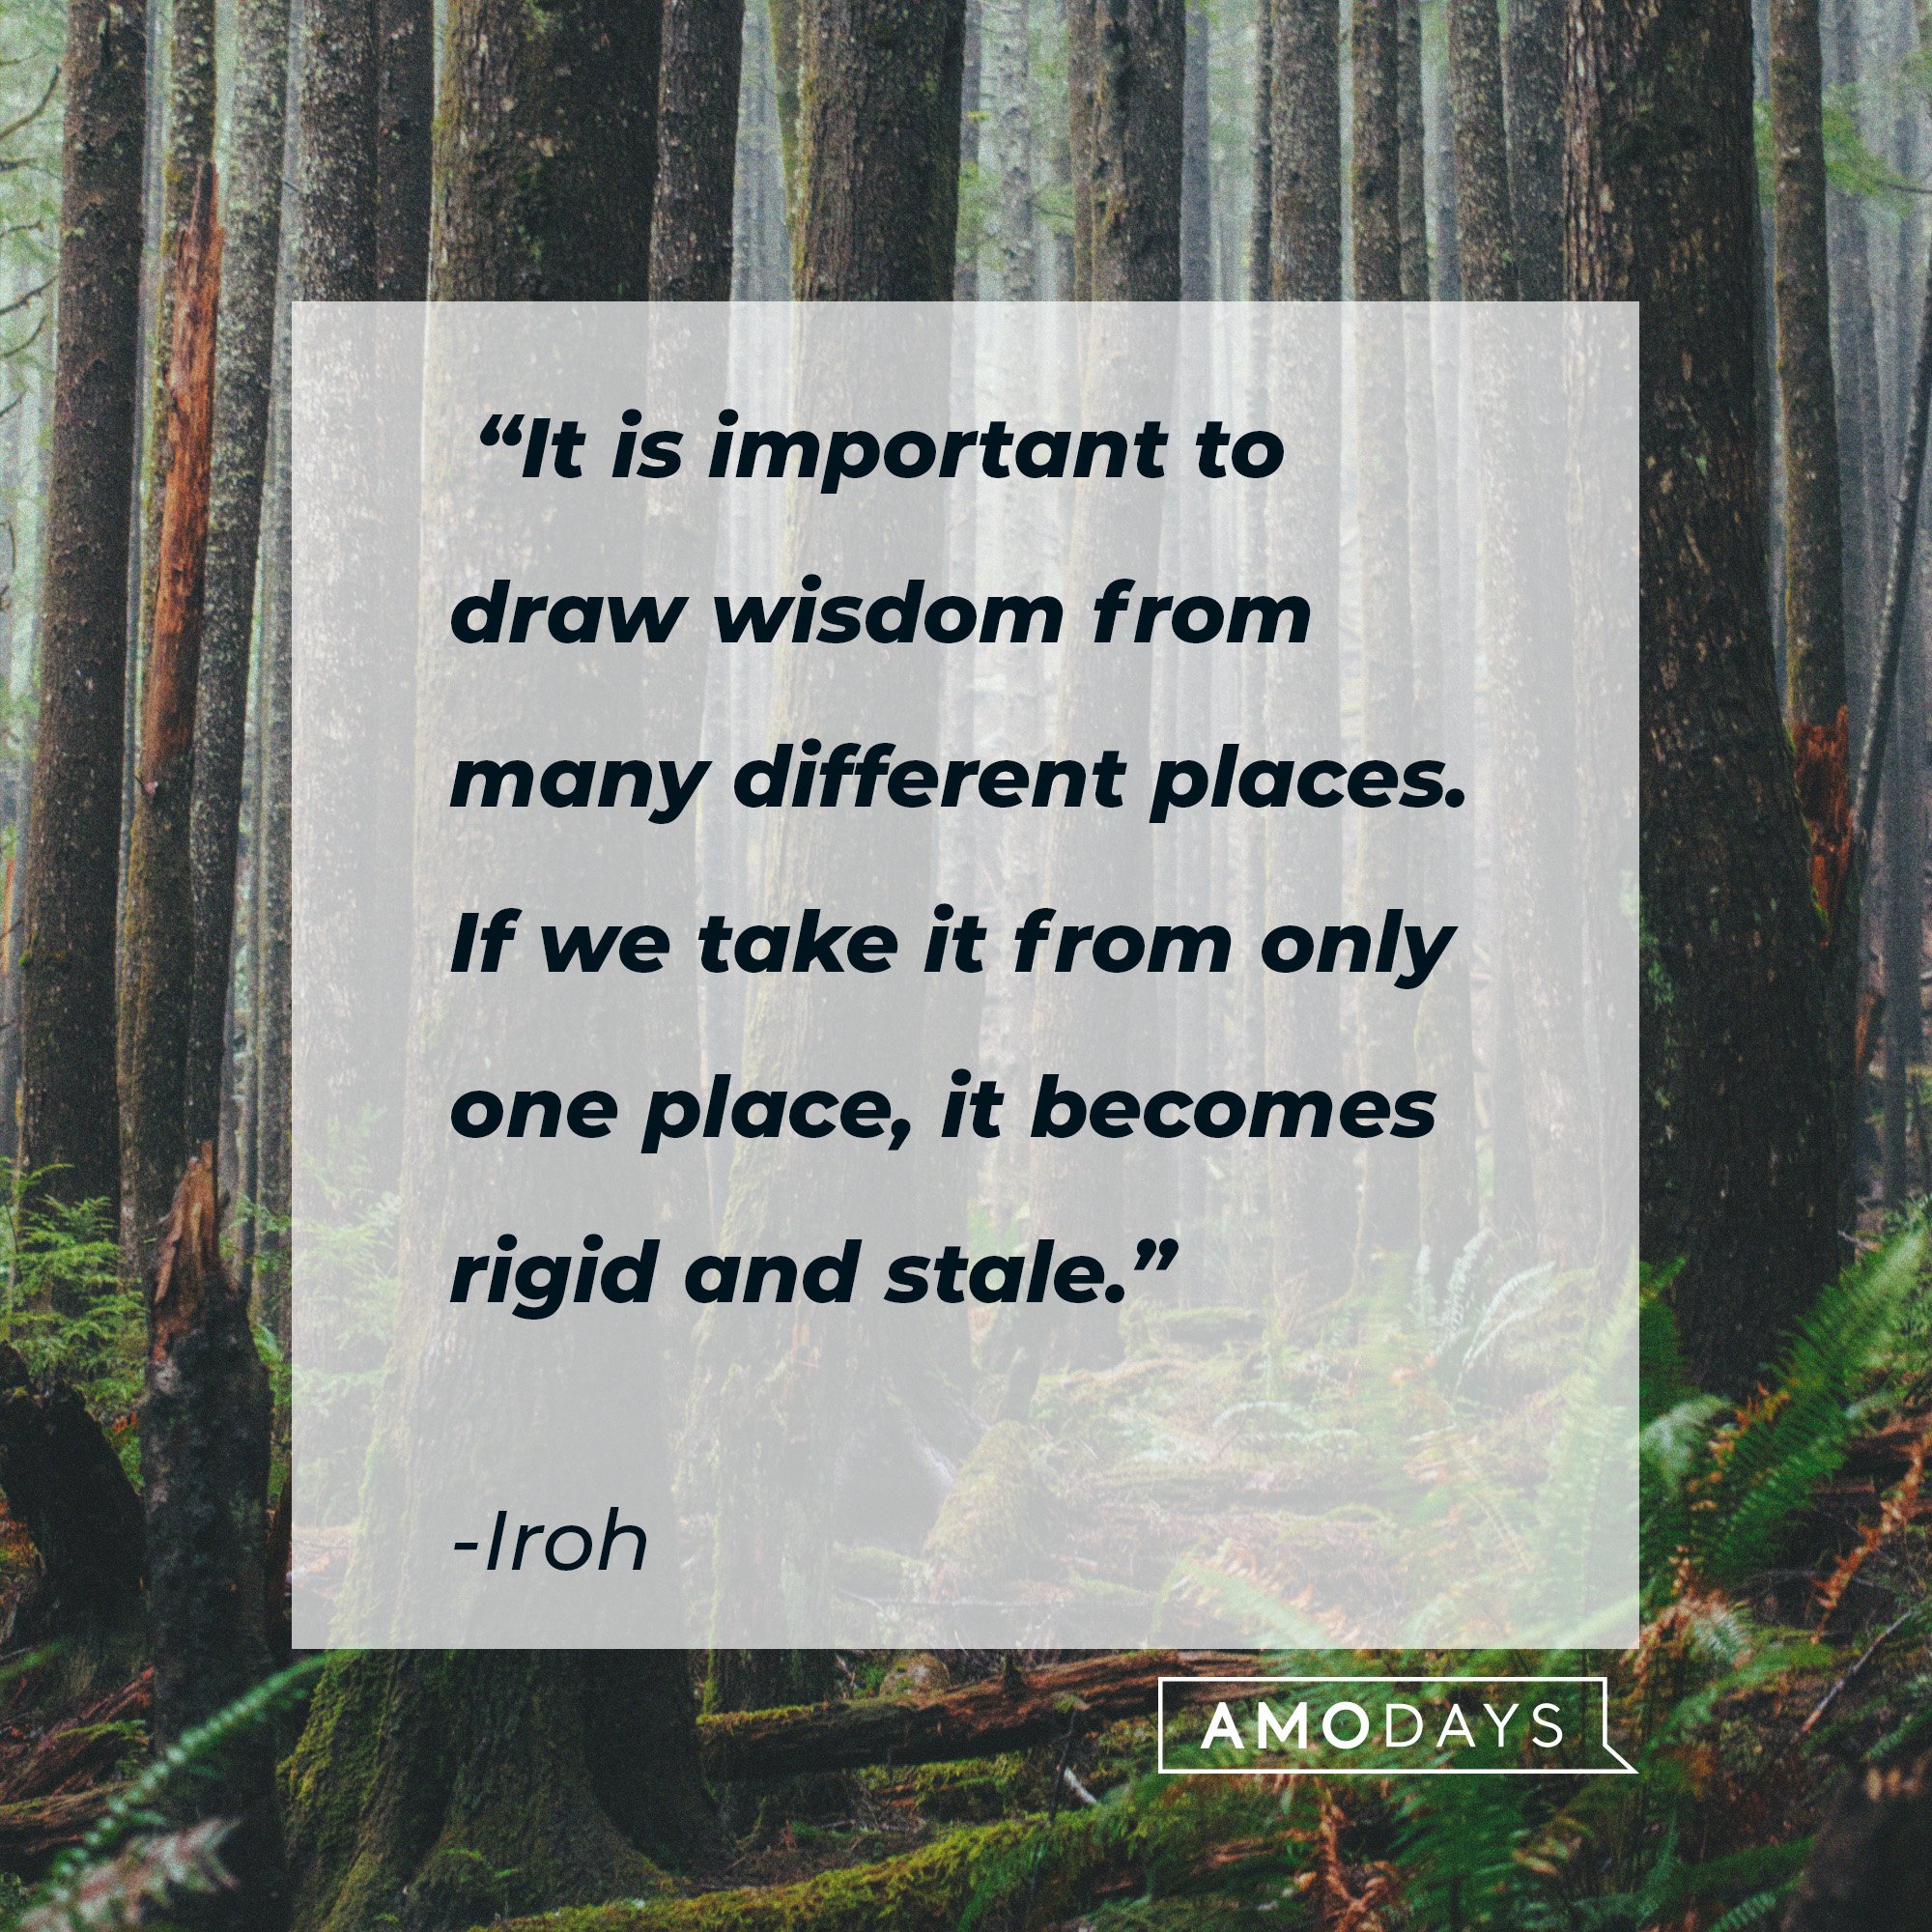 Iroh's quote: “It is important to draw wisdom from many different places. If we take it from only one place, it becomes rigid and stale.” | Image: AmoDays